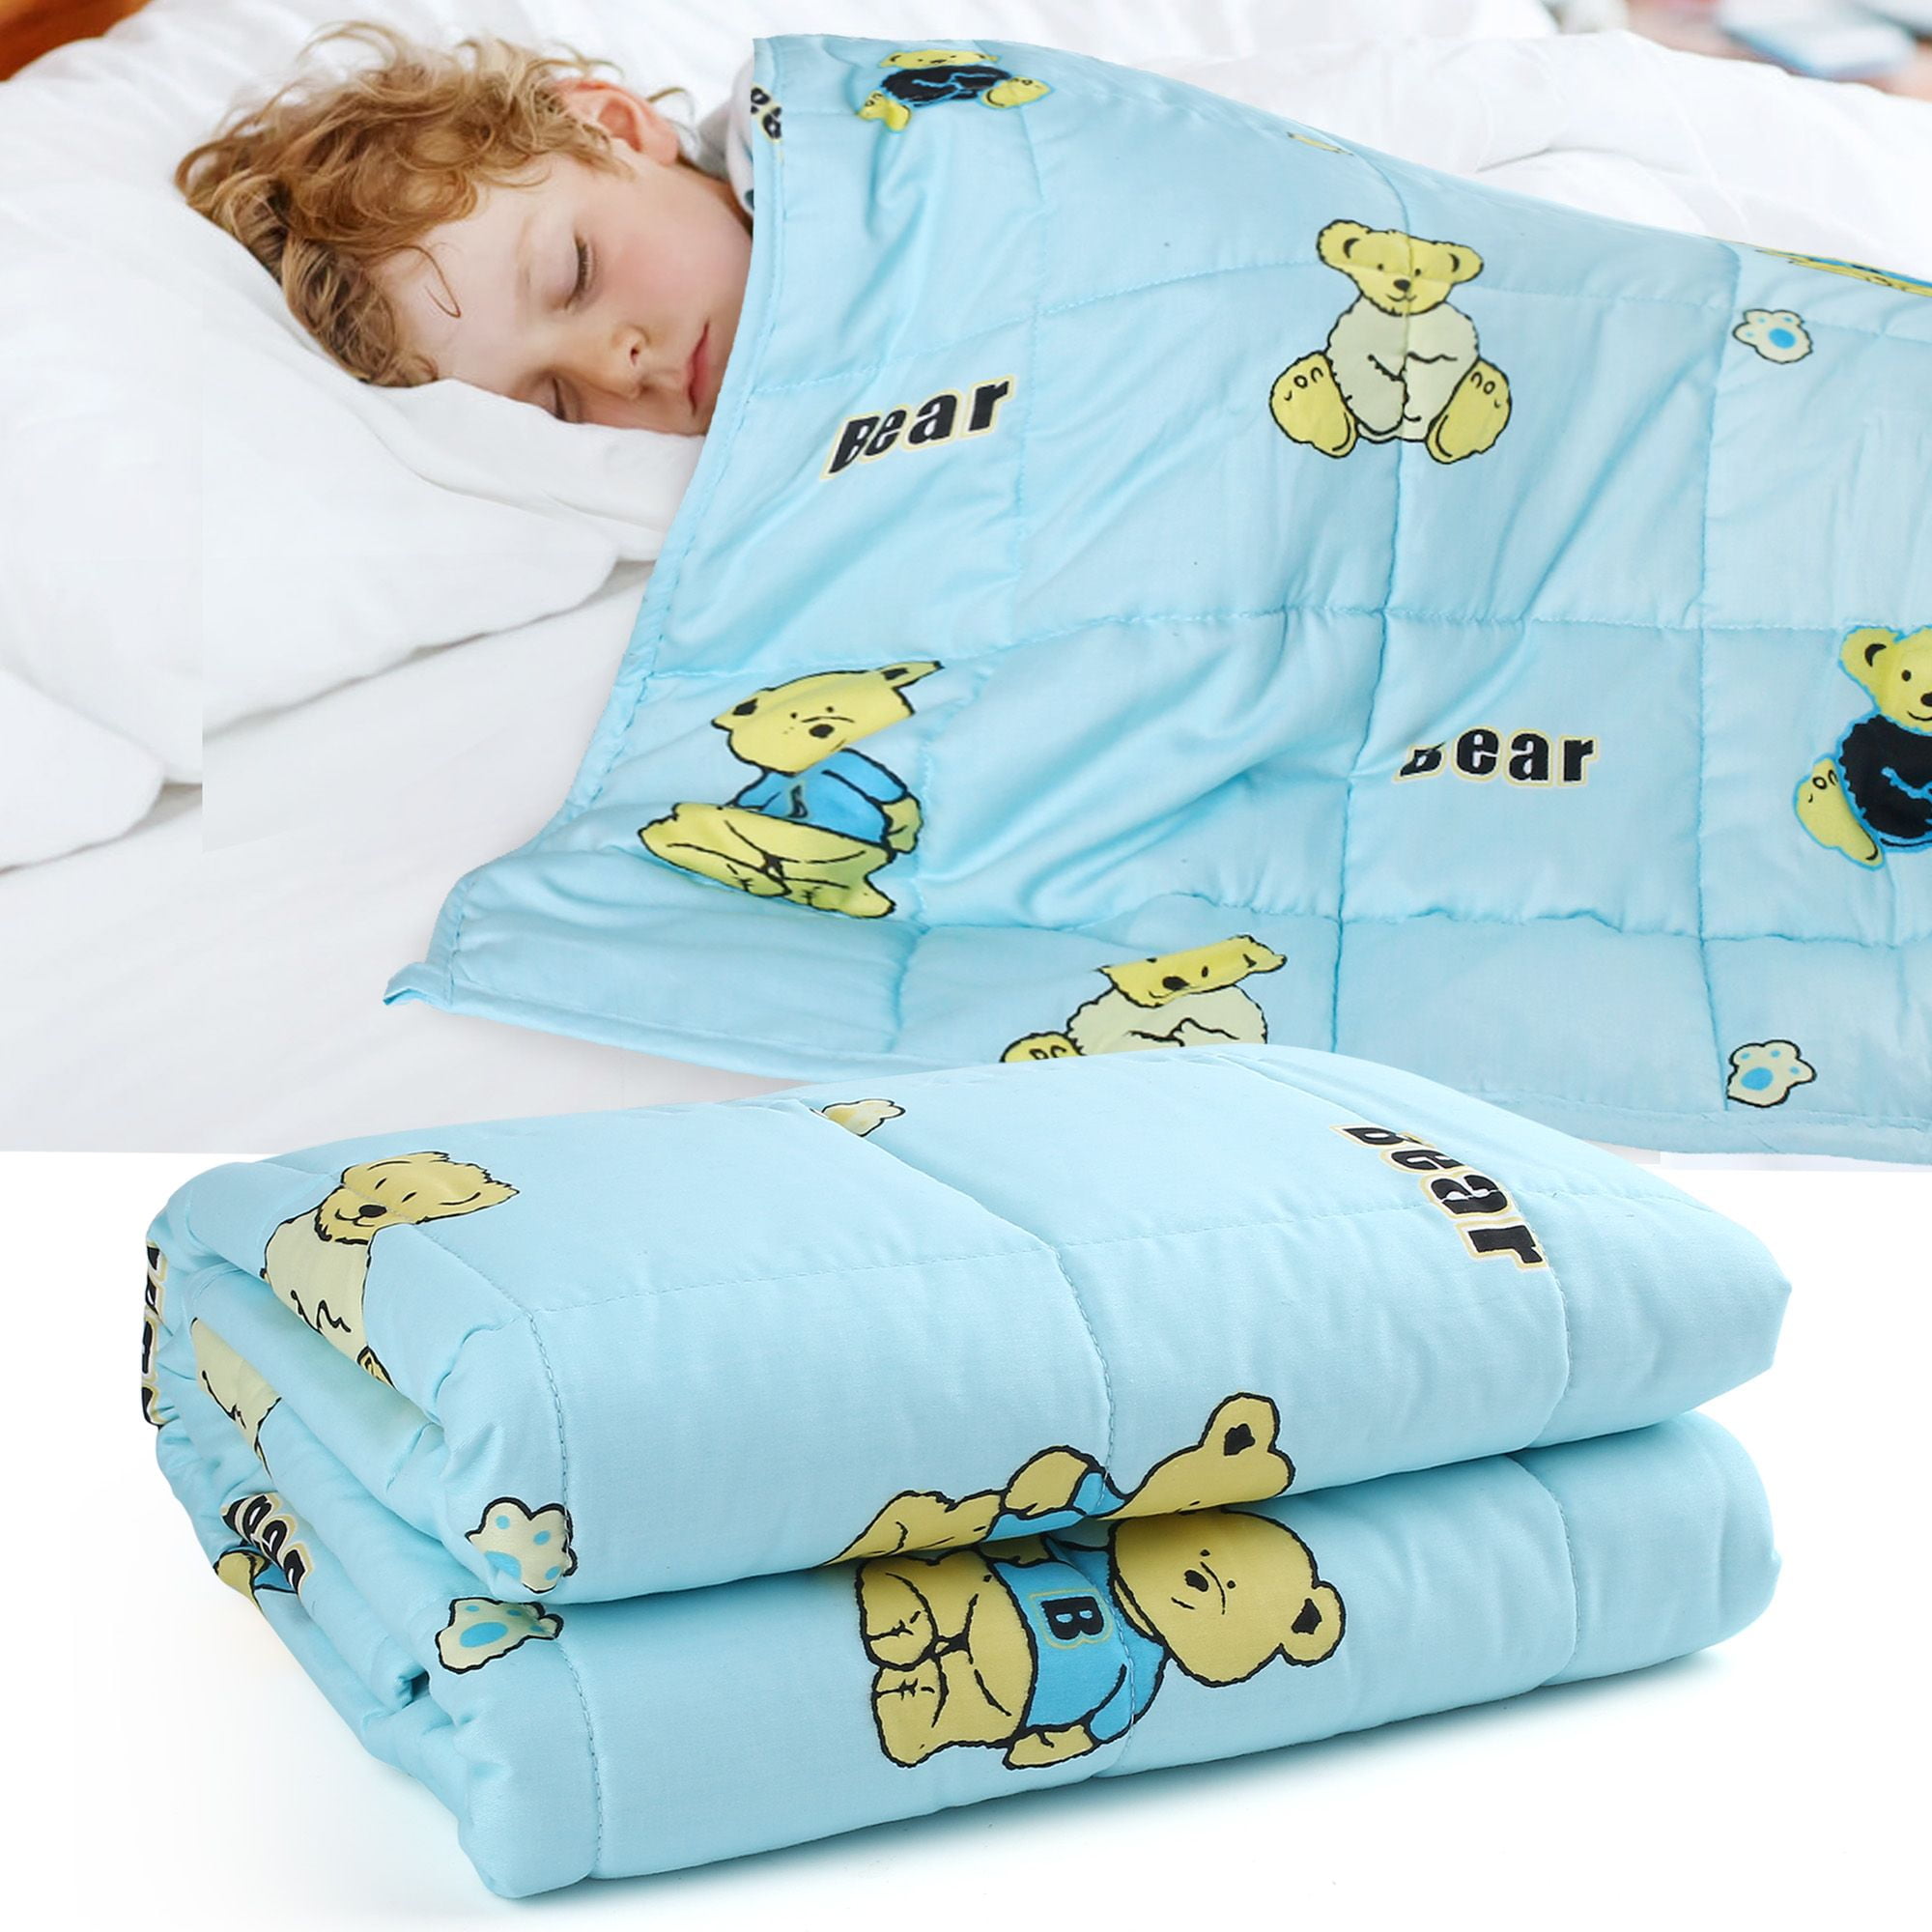 36-x-48-inch-weighted-blanket-for-kids-5-lbs-soft-cooling-child-size